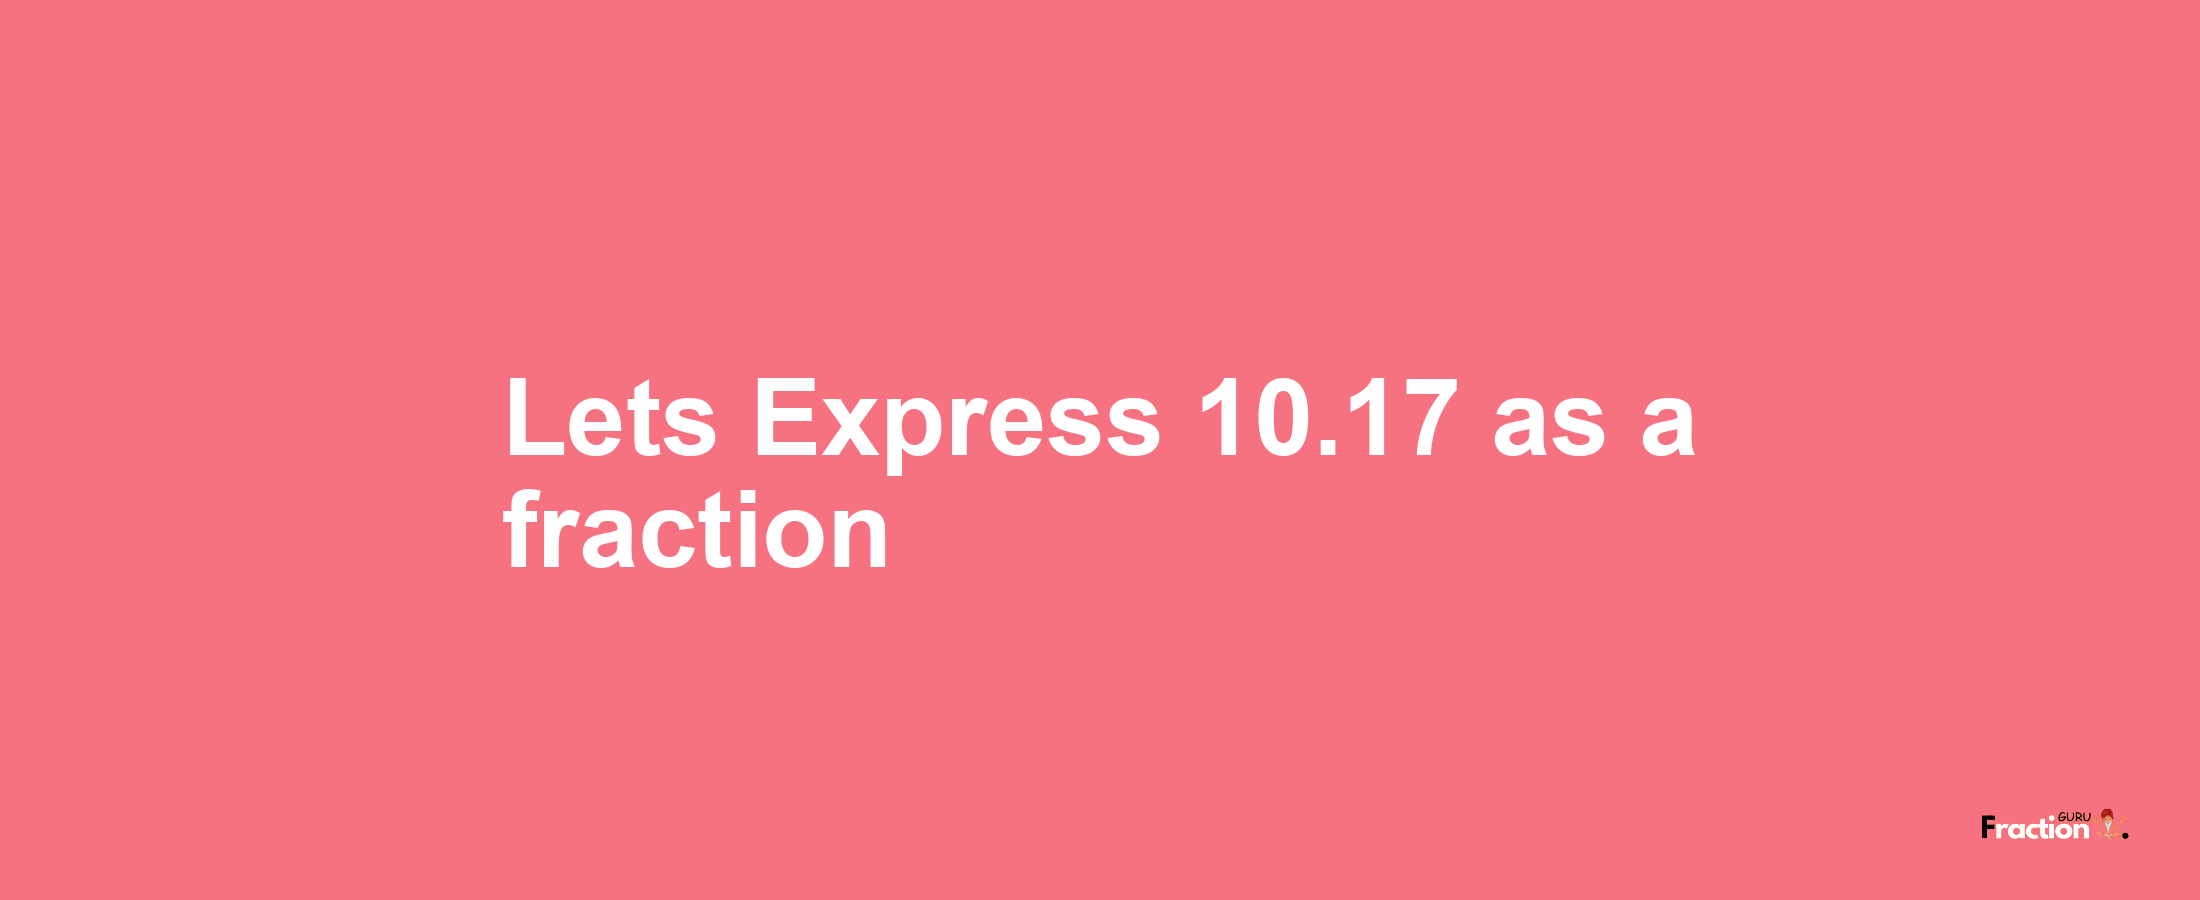 Lets Express 10.17 as afraction